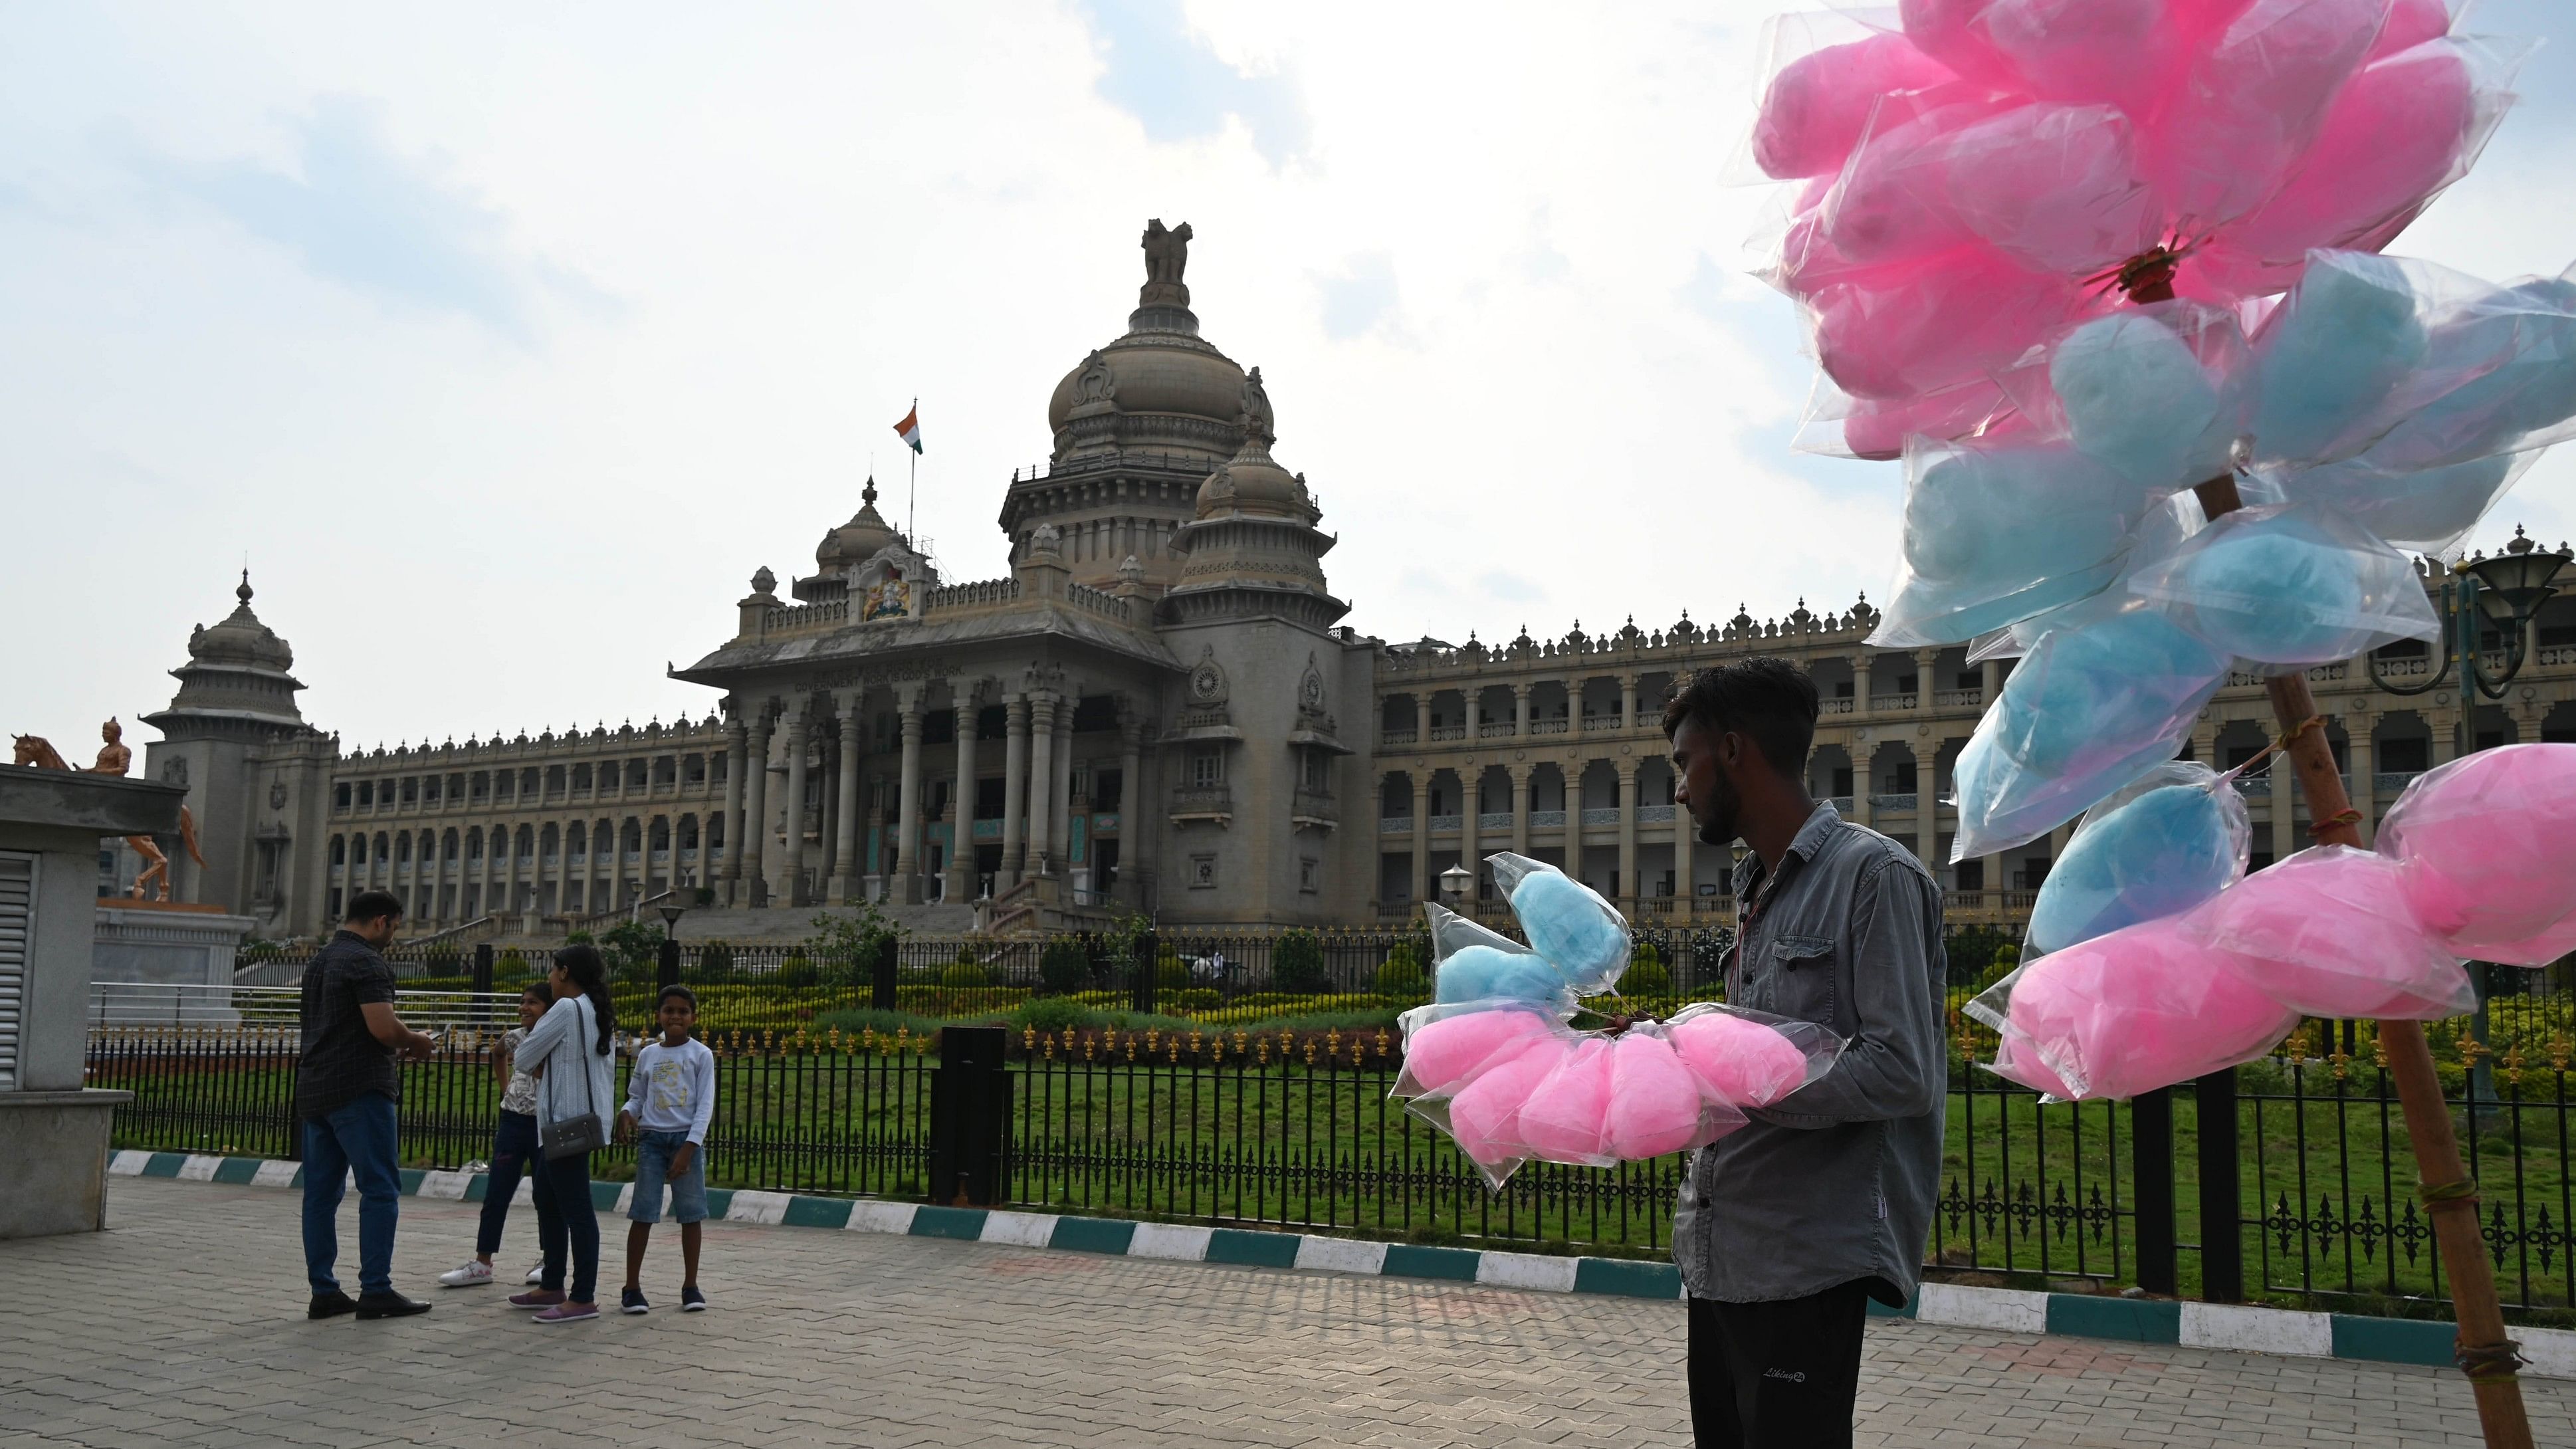 The cotton candy gets its quintessential pink colour from various food dyes, one of which is Rhodamine B. DH Photo/B K Janardhan/Pic for representation